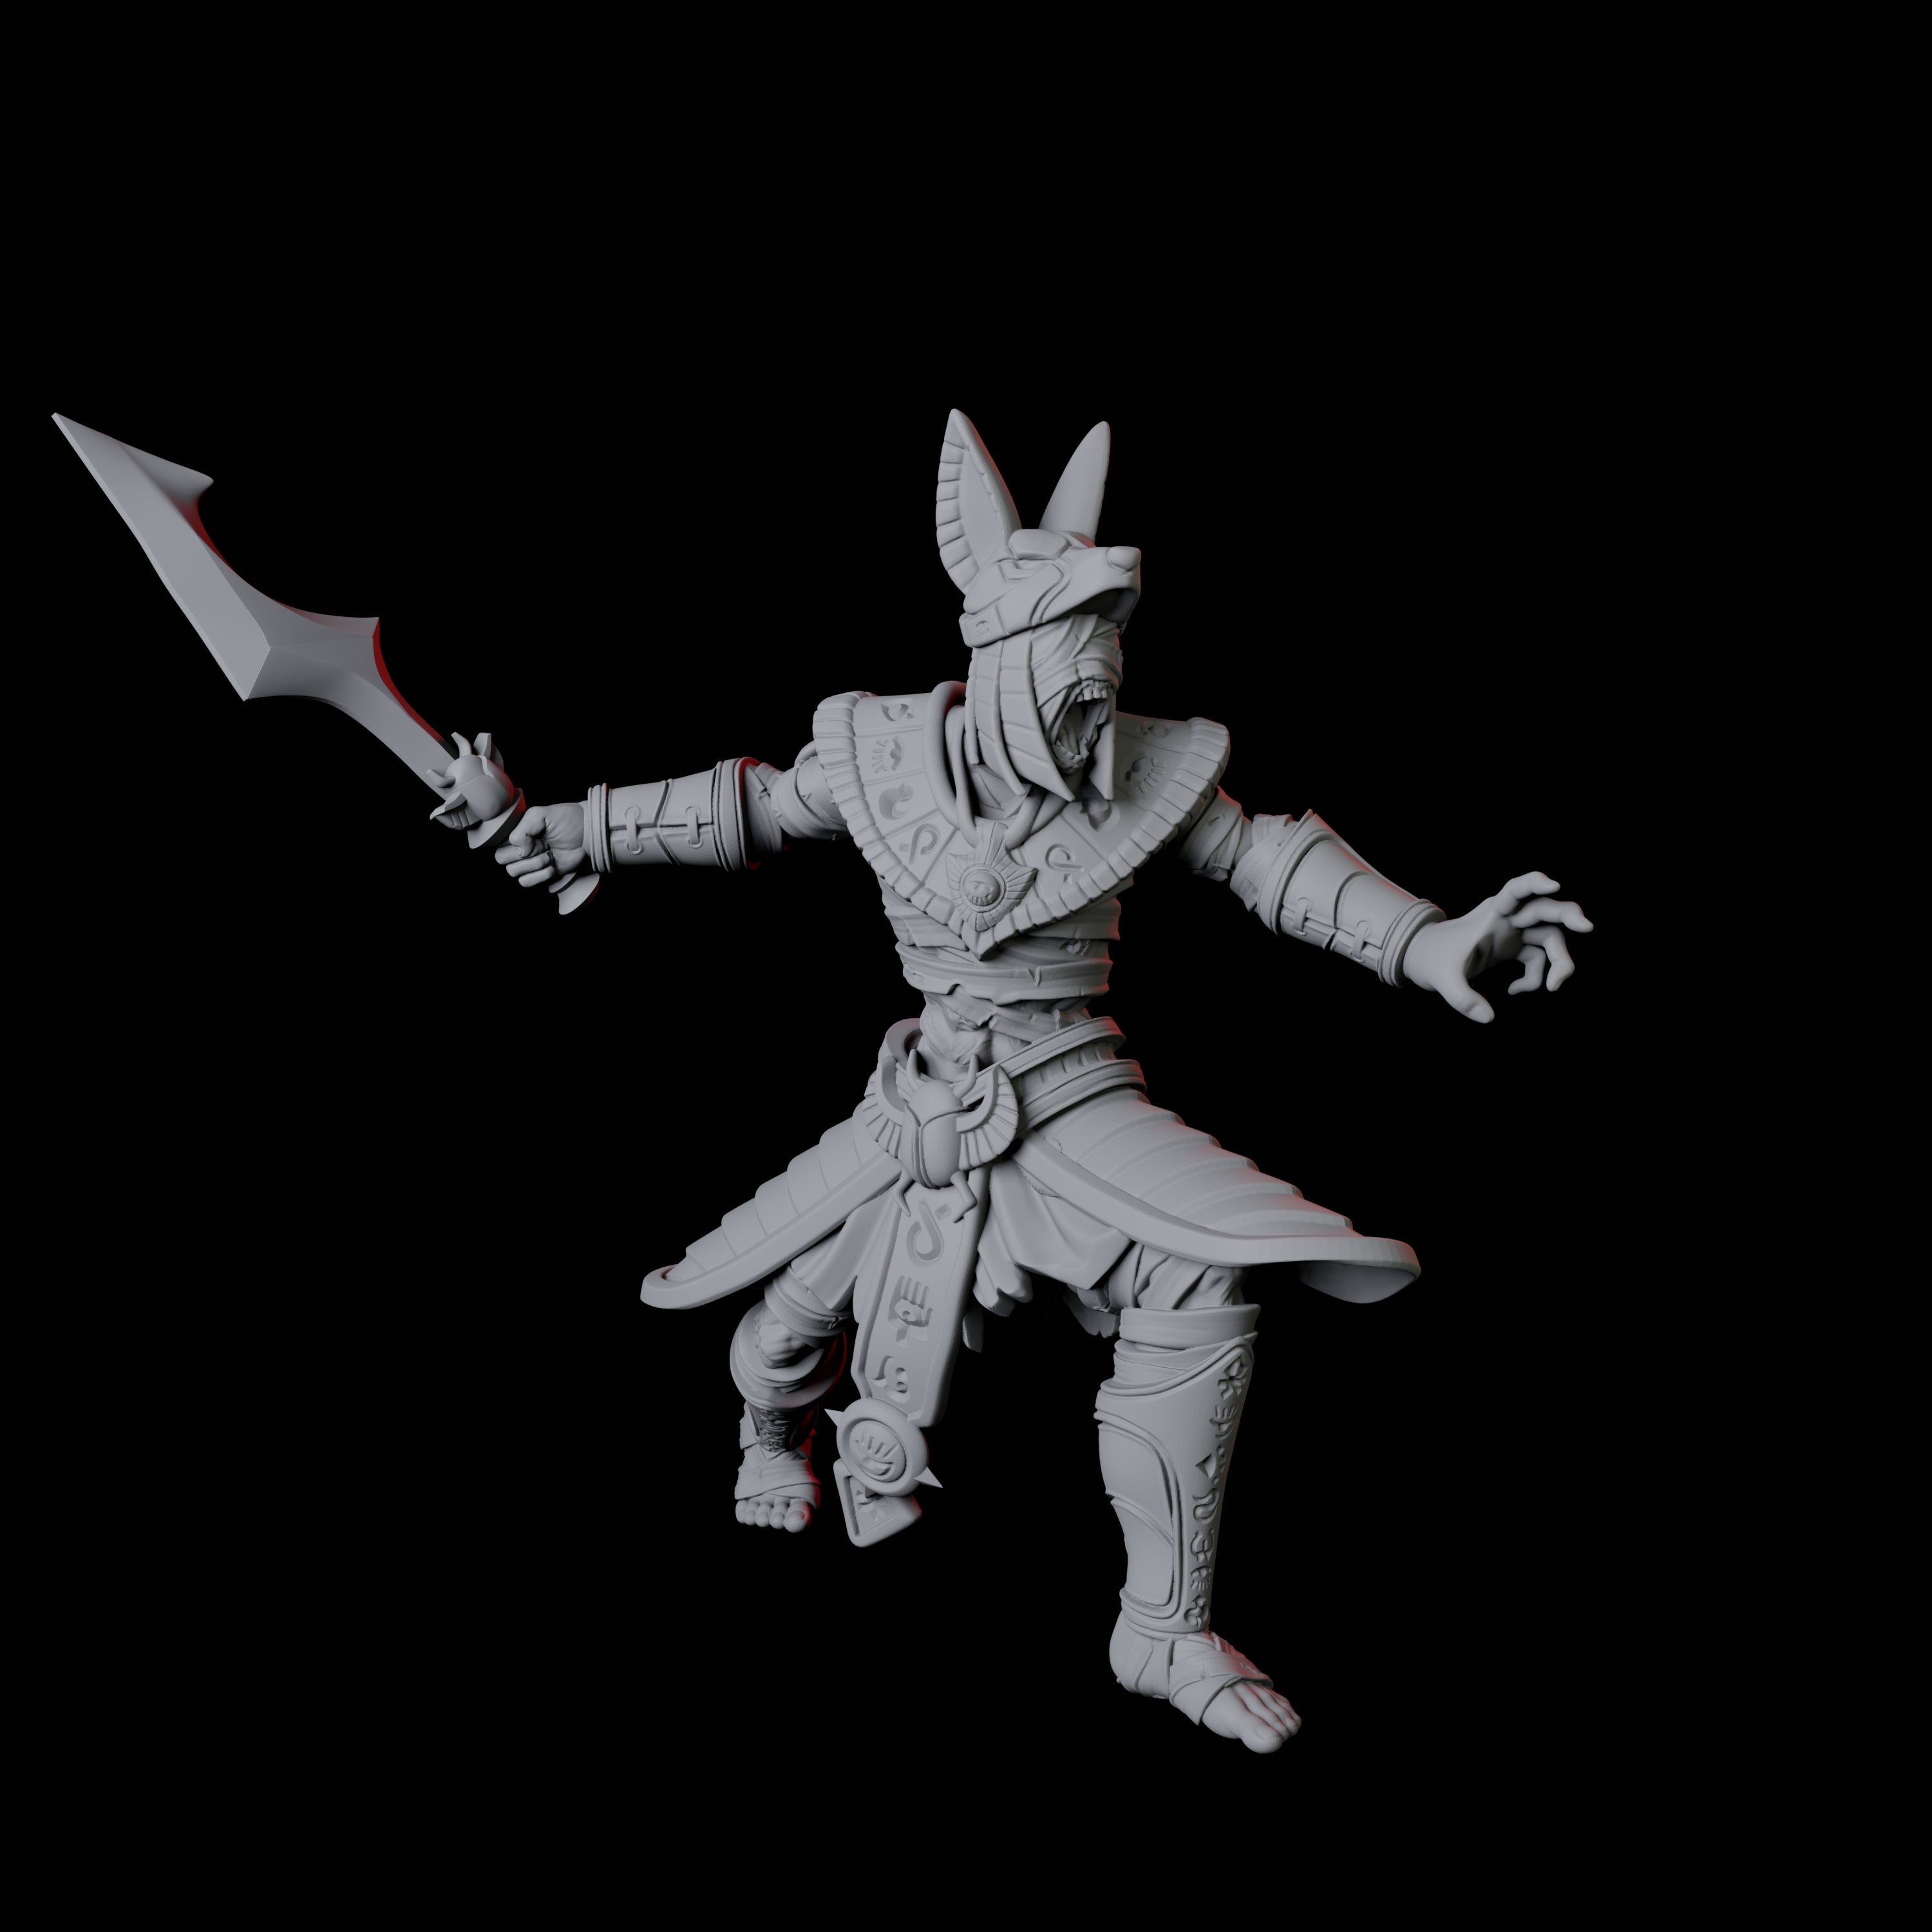 Masked Pharaoh Guard C Miniature for Dungeons and Dragons, Pathfinder or other TTRPGs